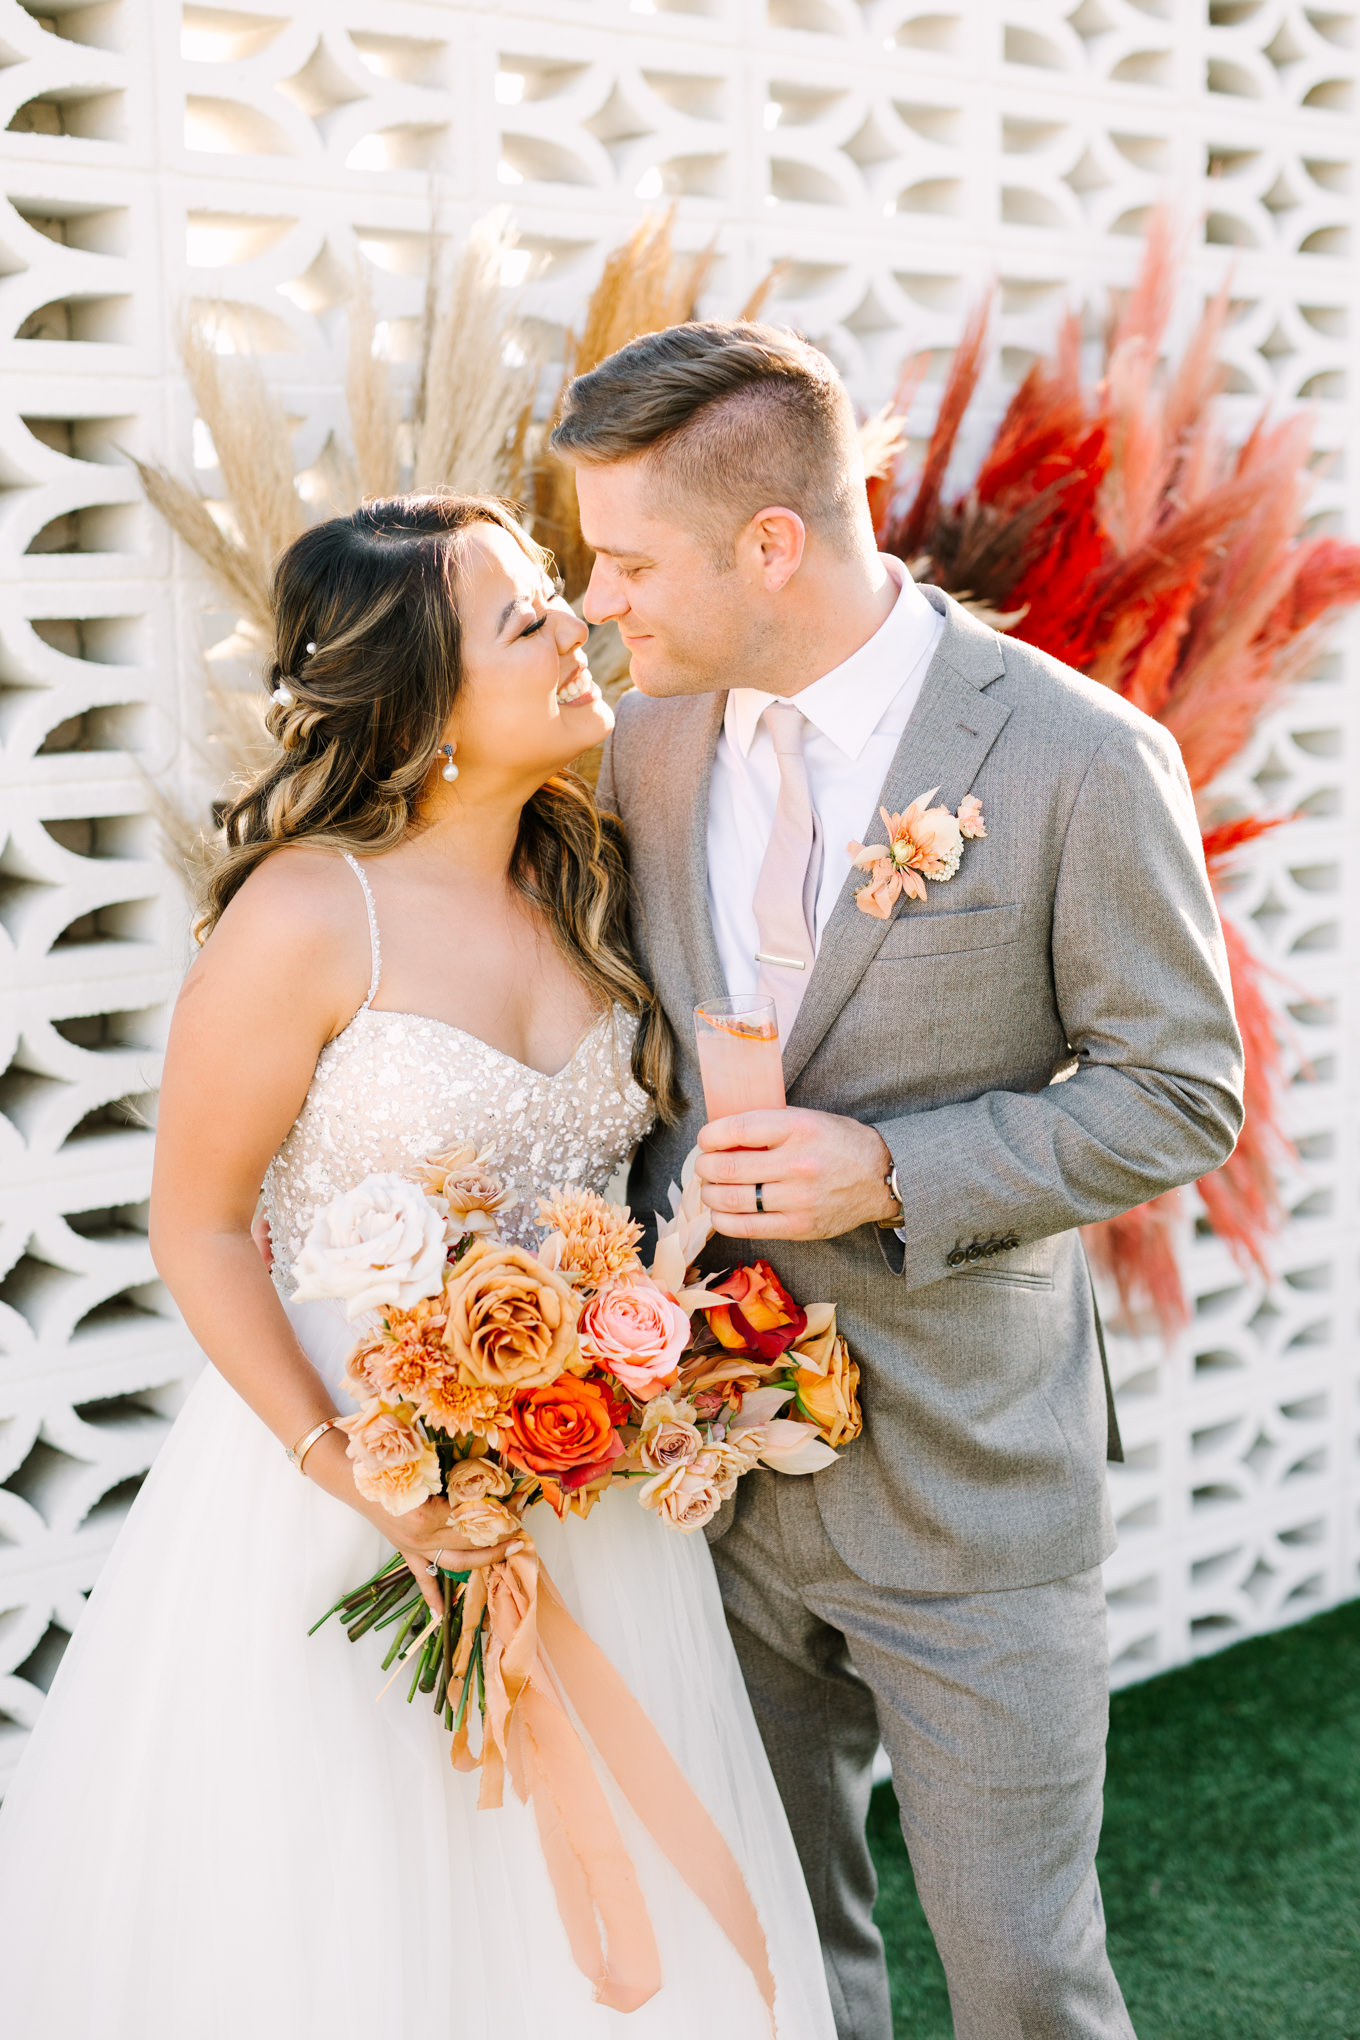 Bride and groom on white breeze block wall | Pink and orange Lautner Compound wedding | Colorful Palm Springs wedding photography | #palmspringsphotographer #palmspringswedding #lautnercompound #southerncaliforniawedding  Source: Mary Costa Photography | Los Angeles